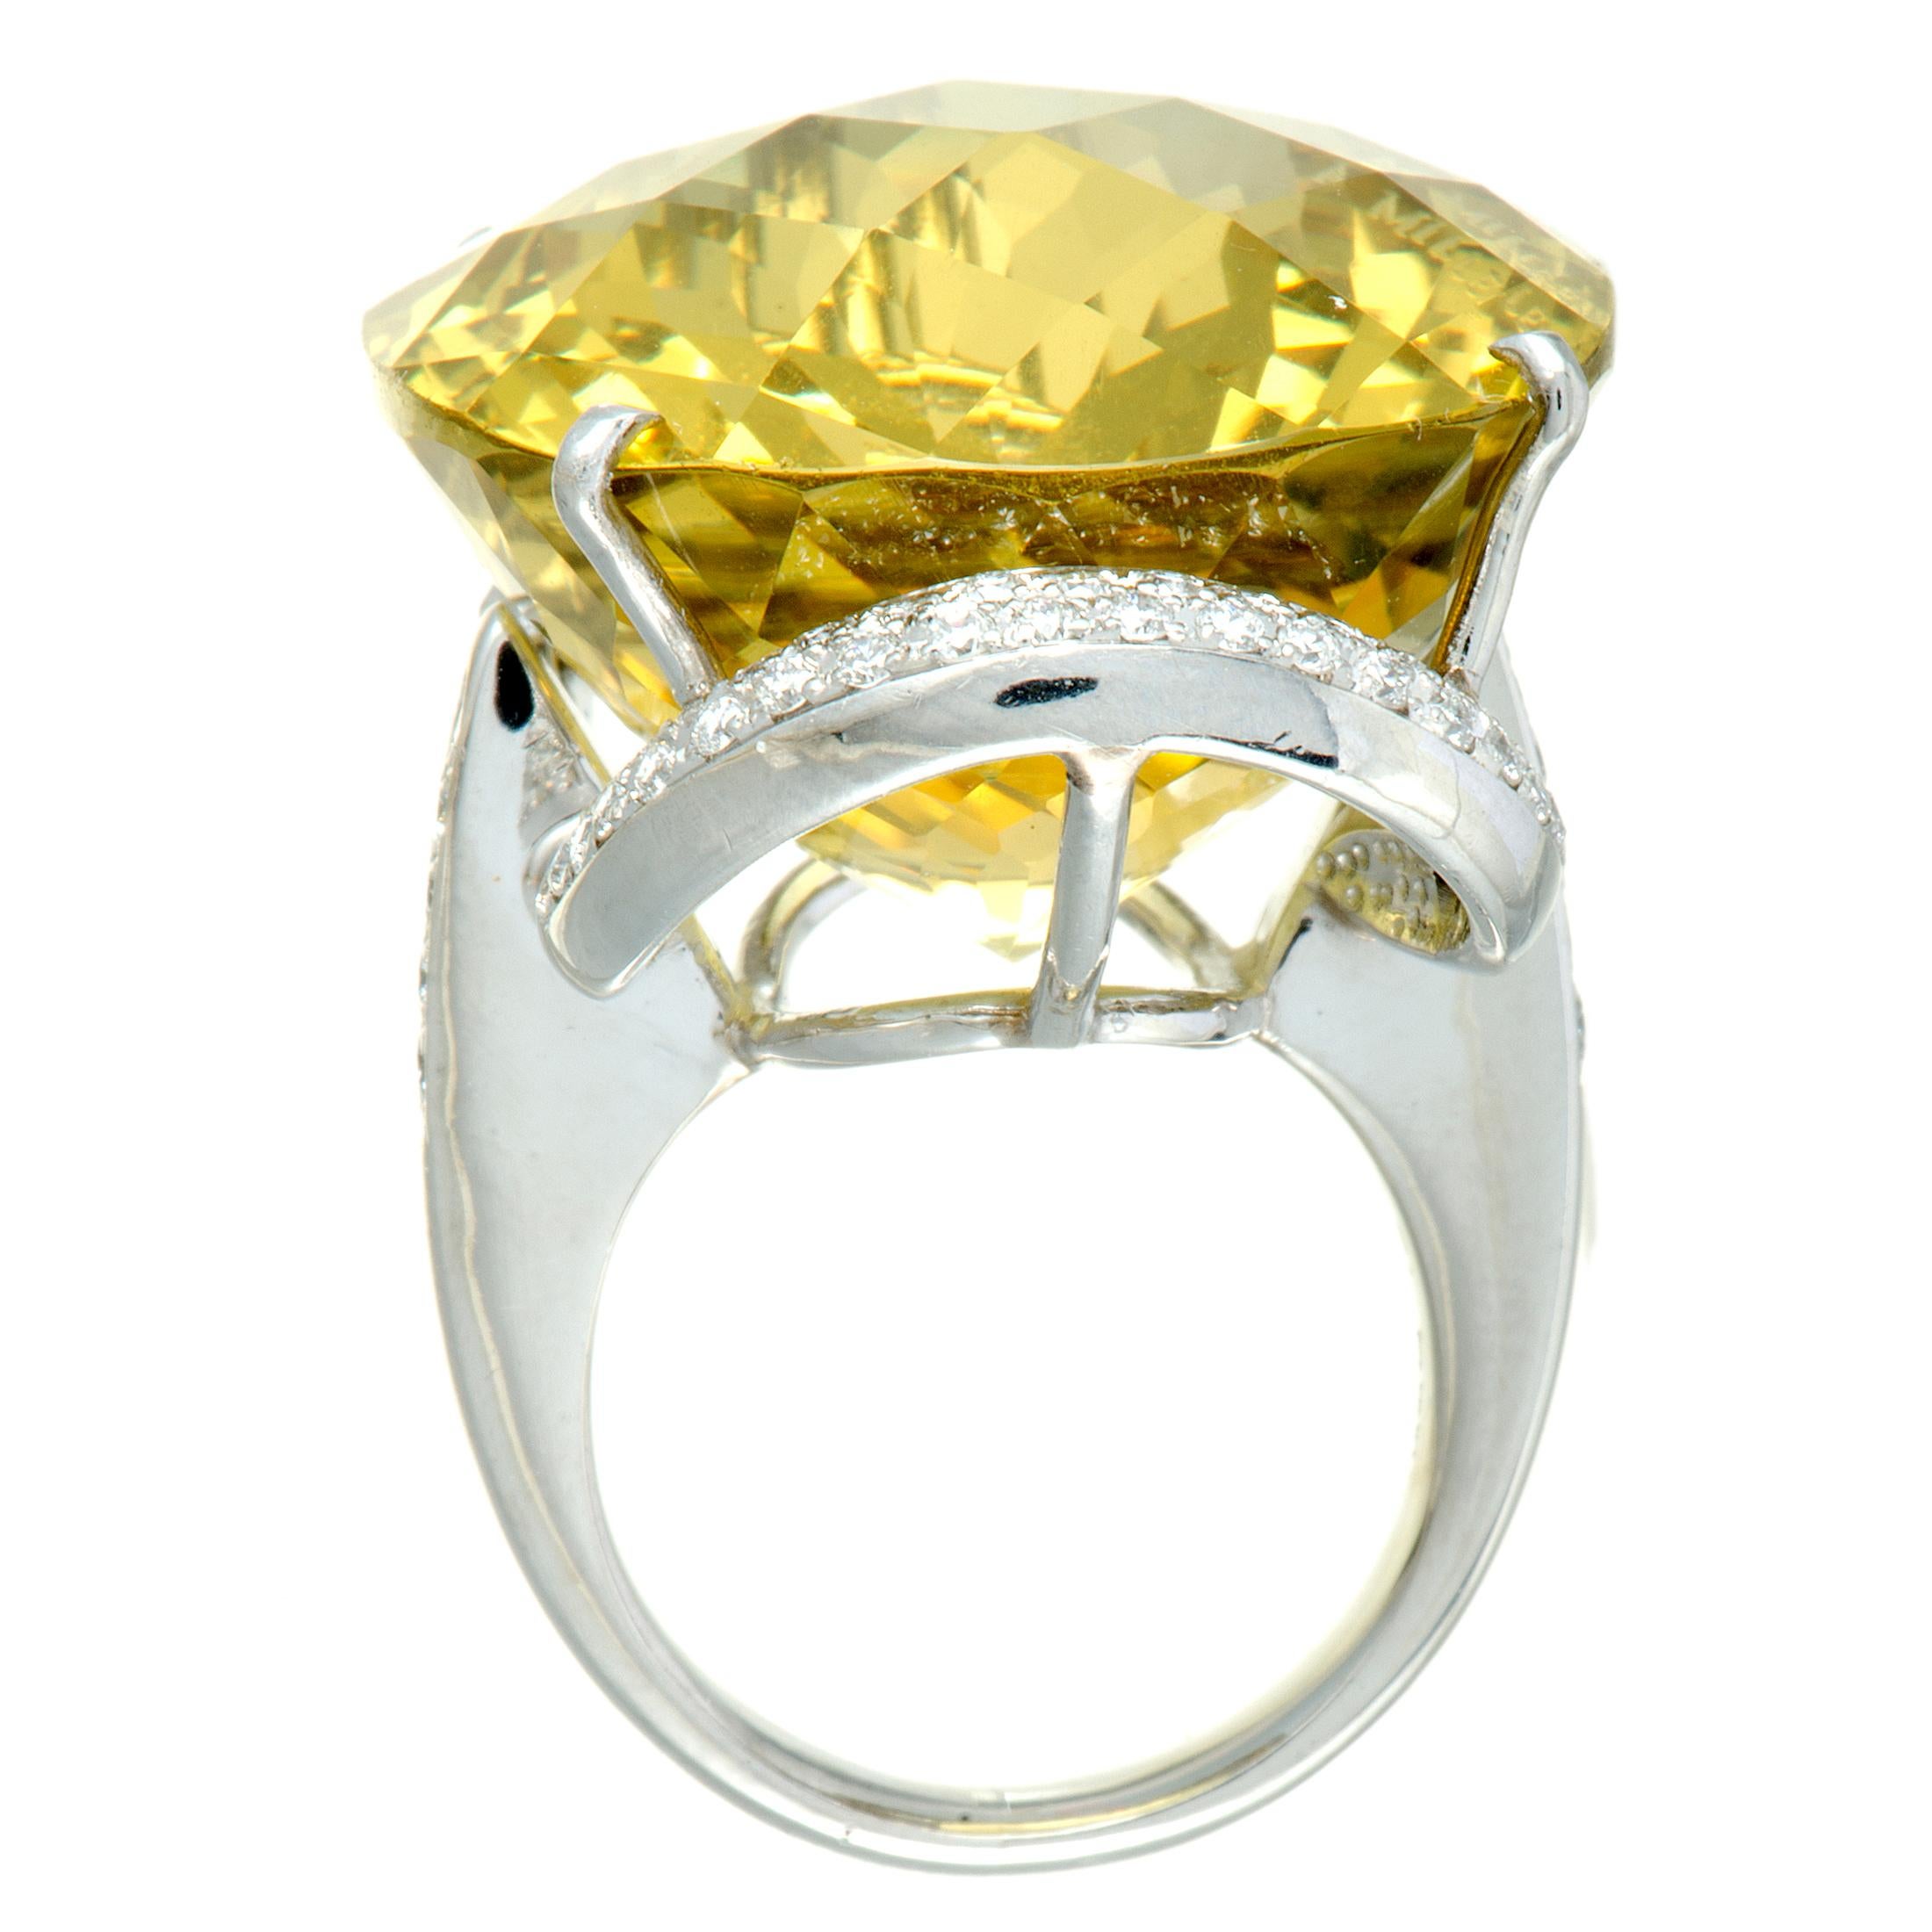 The spectacular lemon citrine takes the central place in this superb platinum ring in an exceptionally imposing fashion, luxuriously accentuated by the irresistibly scintillating diamond stones. The citrine weighs astounding 68.71 carats and the